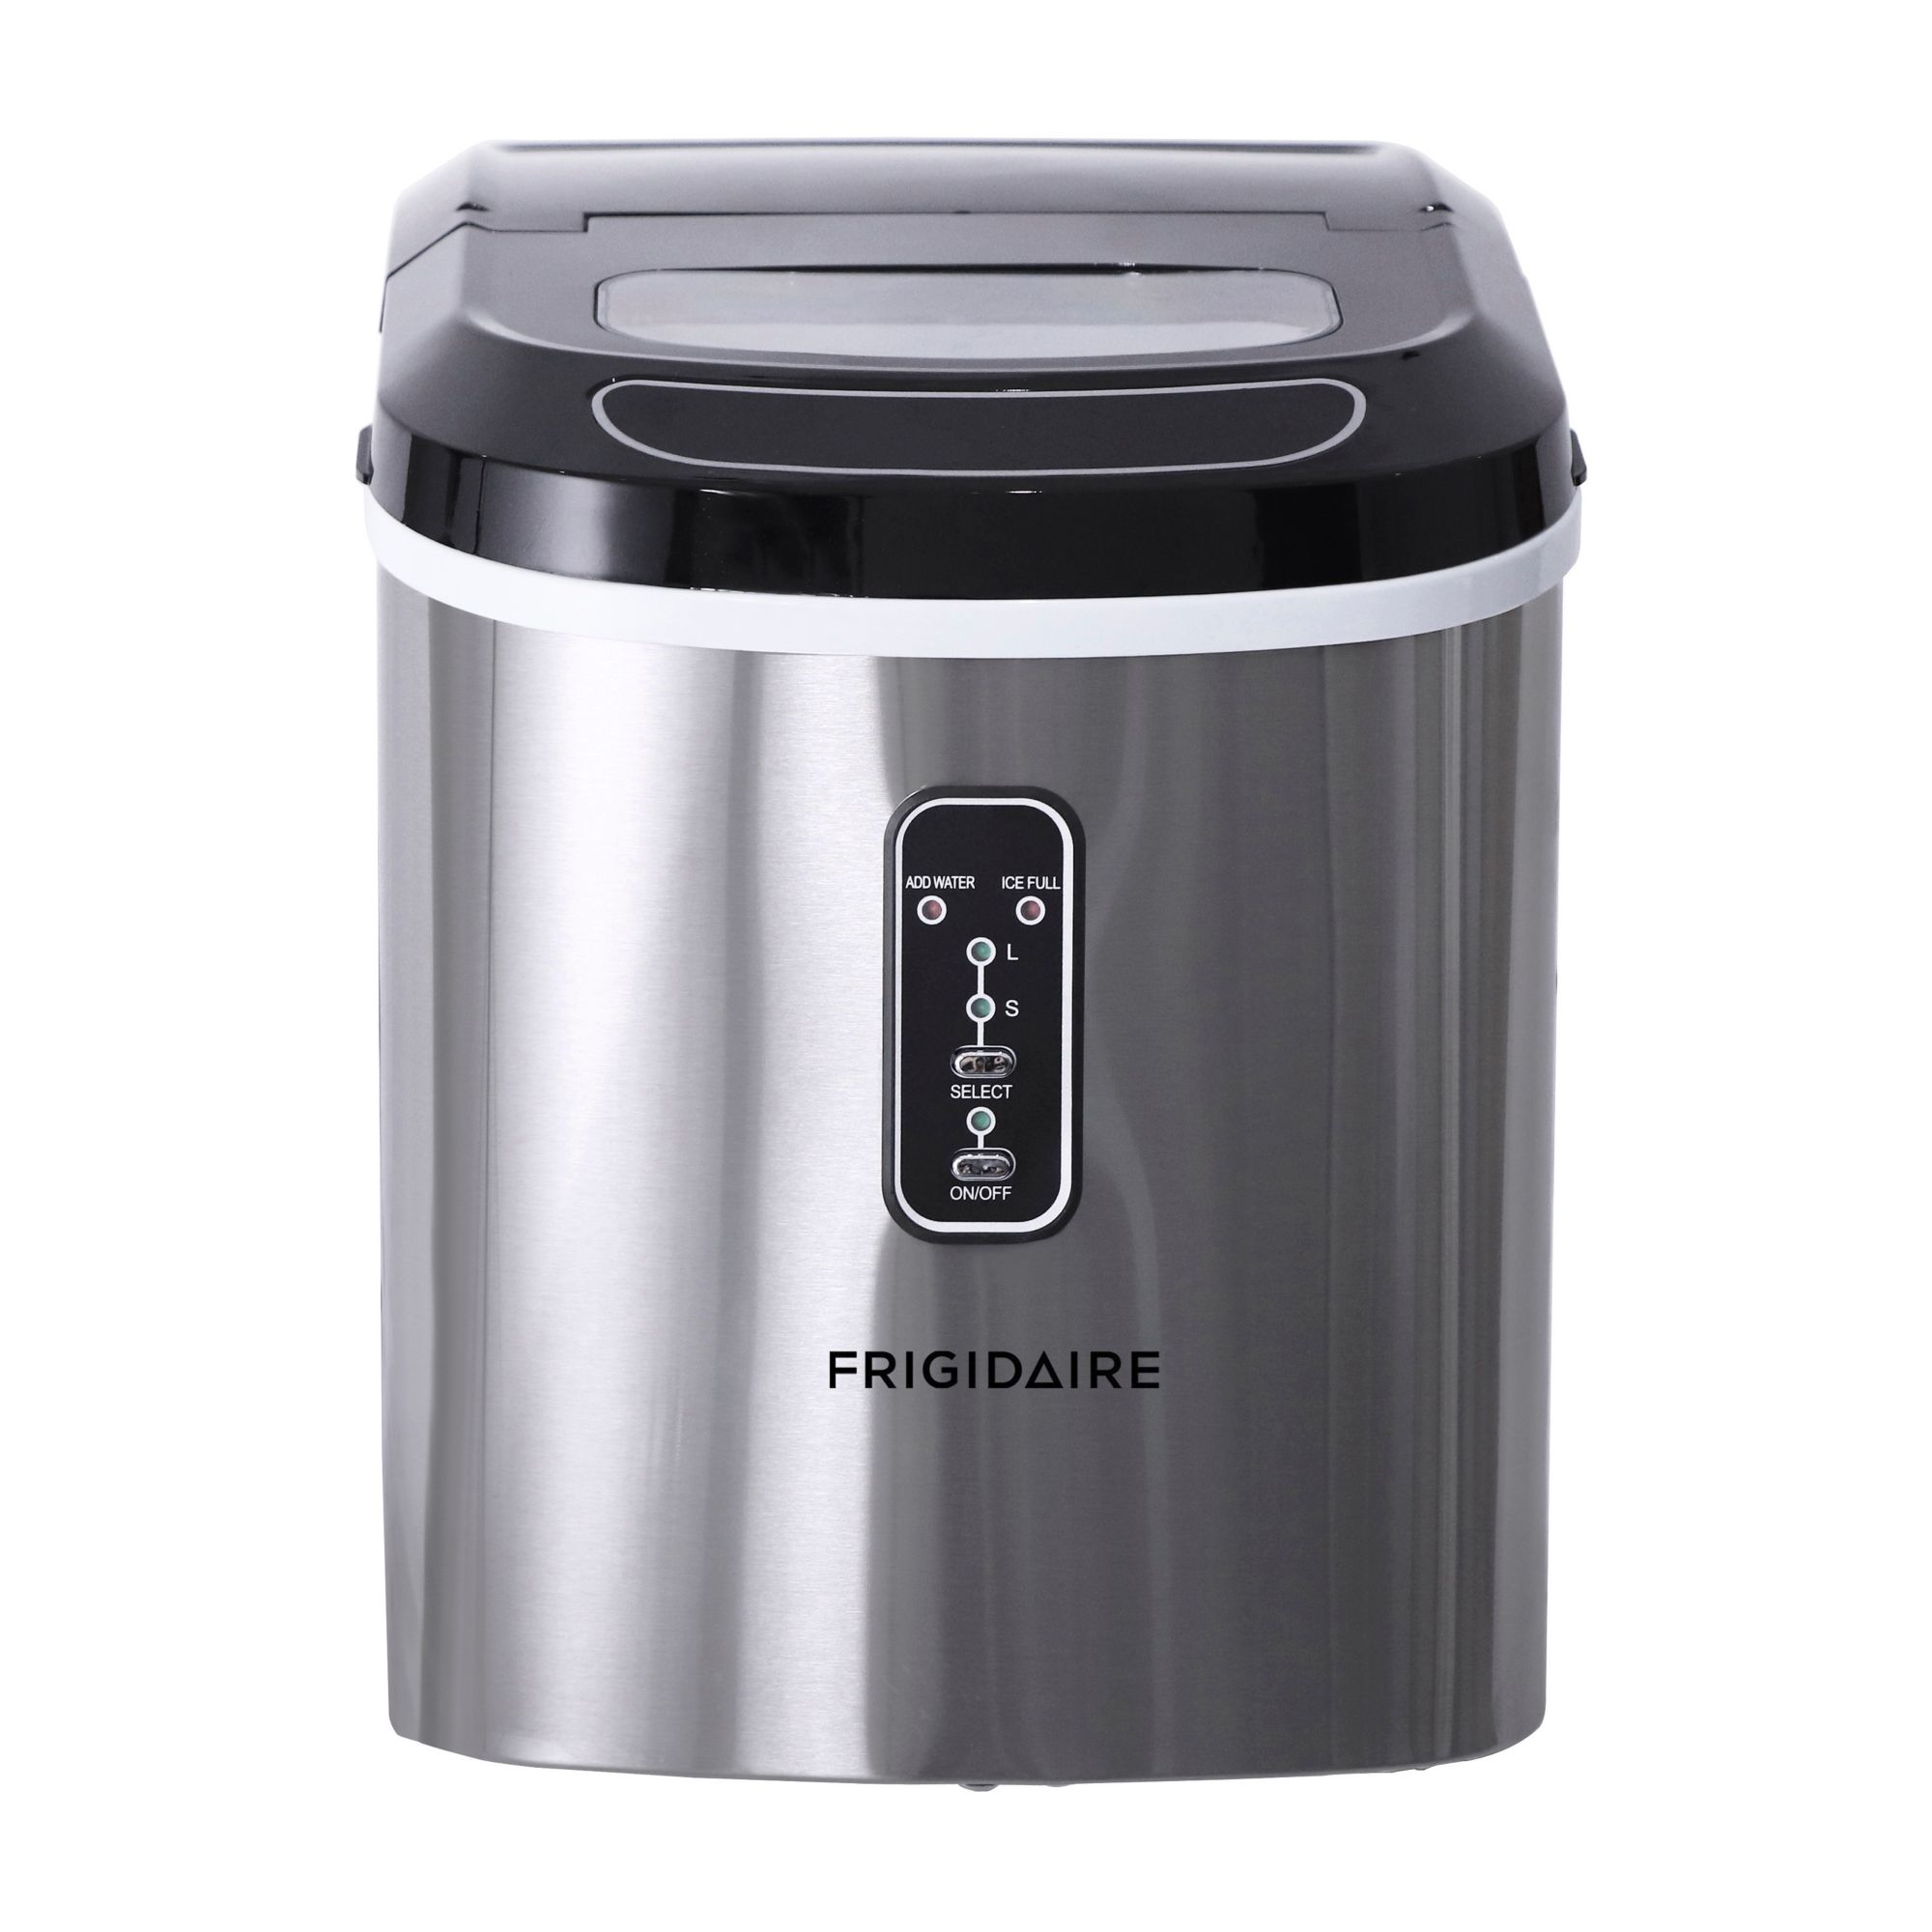 Frigidaire 26-lb. Compact Counter Top Ice Maker, Stainless Steel EFIC106-SS